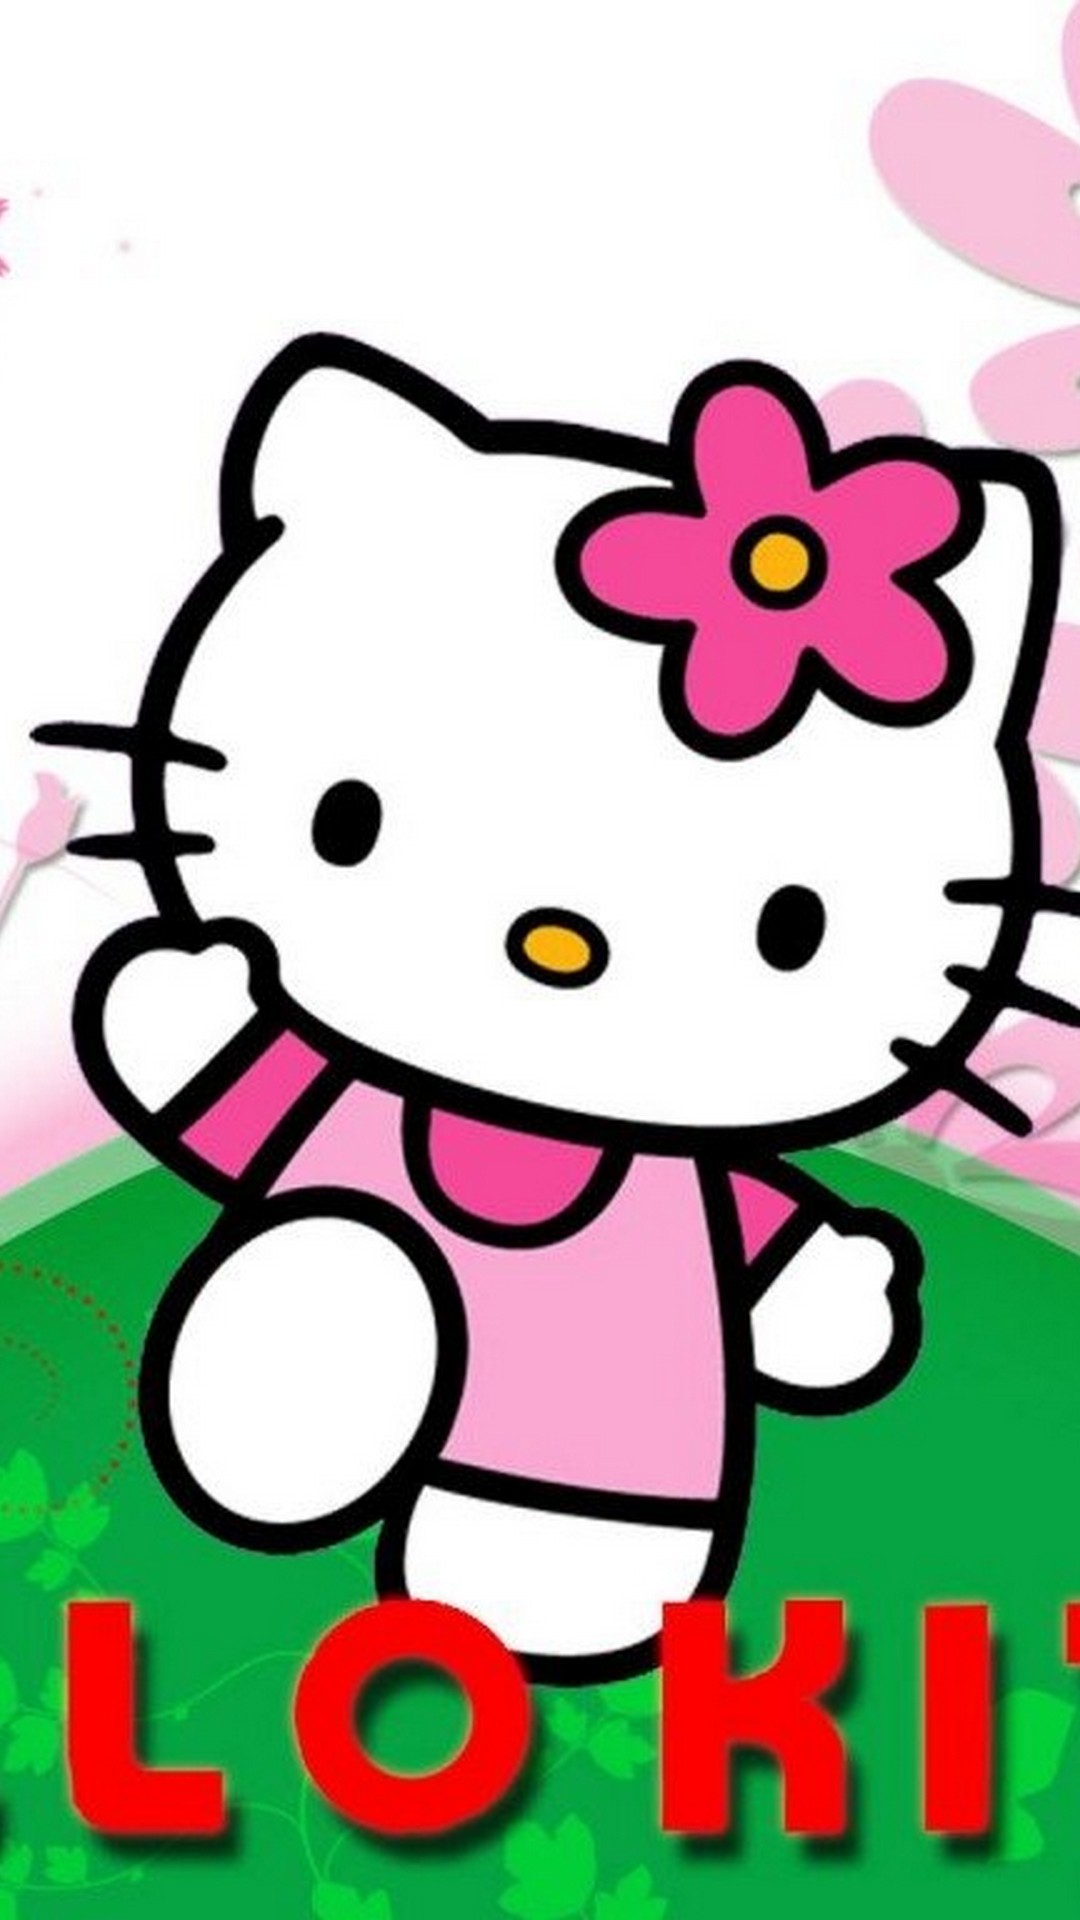 iPhone Wallpaper Hello Kitty Characters with resolution 1080X1920 pixel. You can make this wallpaper for your iPhone 5, 6, 7, 8, X backgrounds, Mobile Screensaver, or iPad Lock Screen